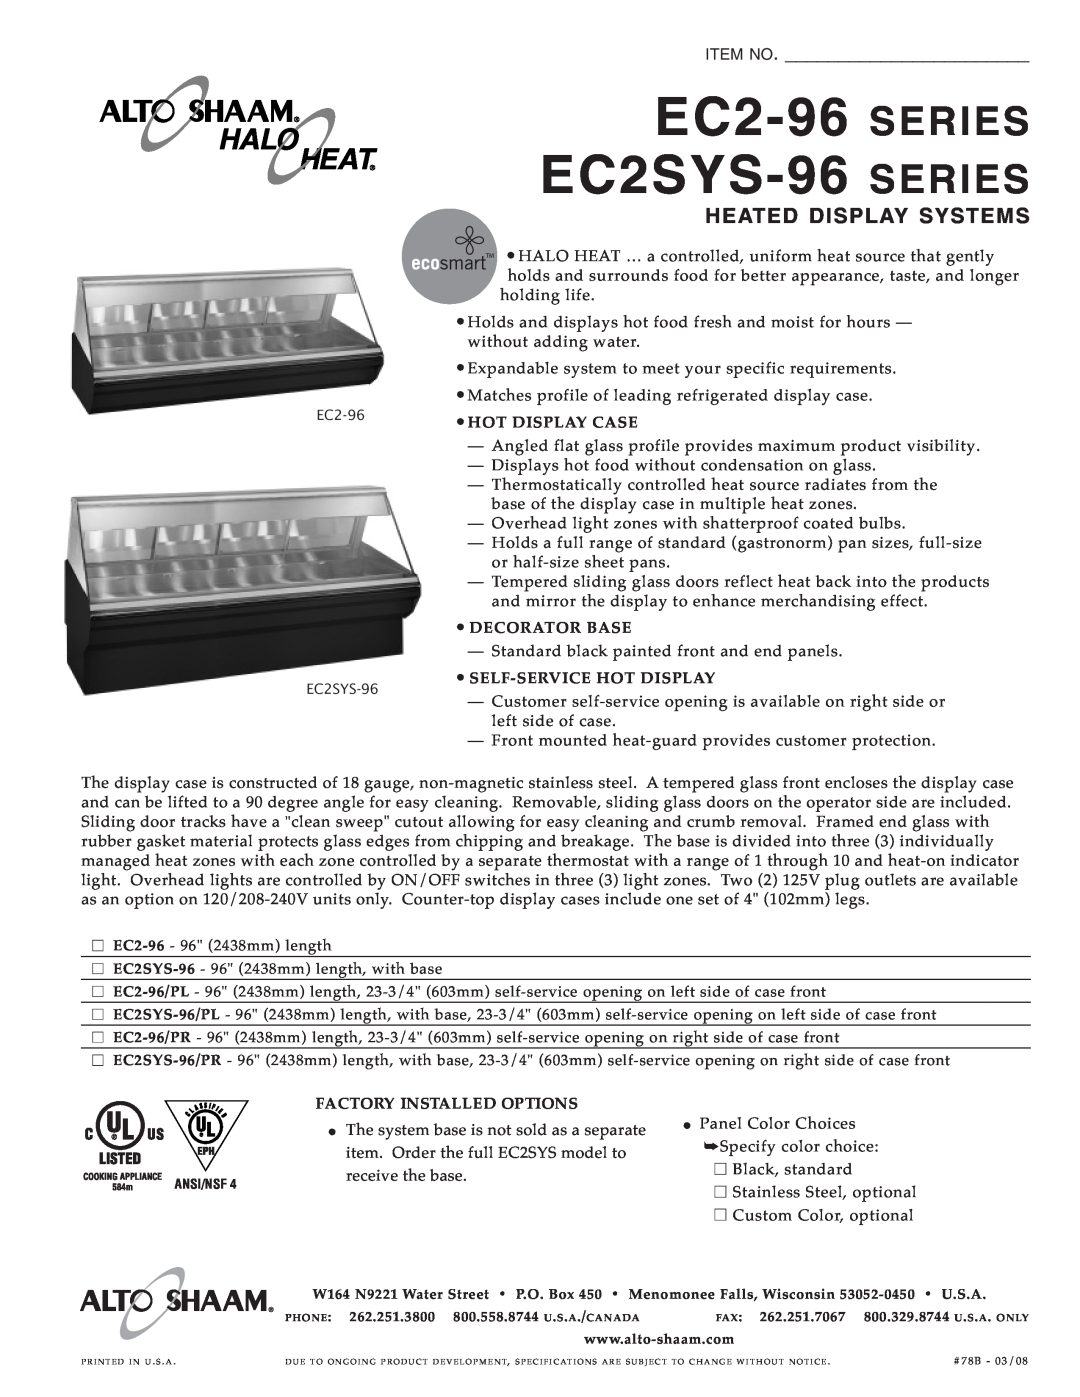 Alto-Shaam EC2SYS-96 specifications EC2-96EC2 SYS-96, Series Series, Item No, Heated Display Syste Ms 